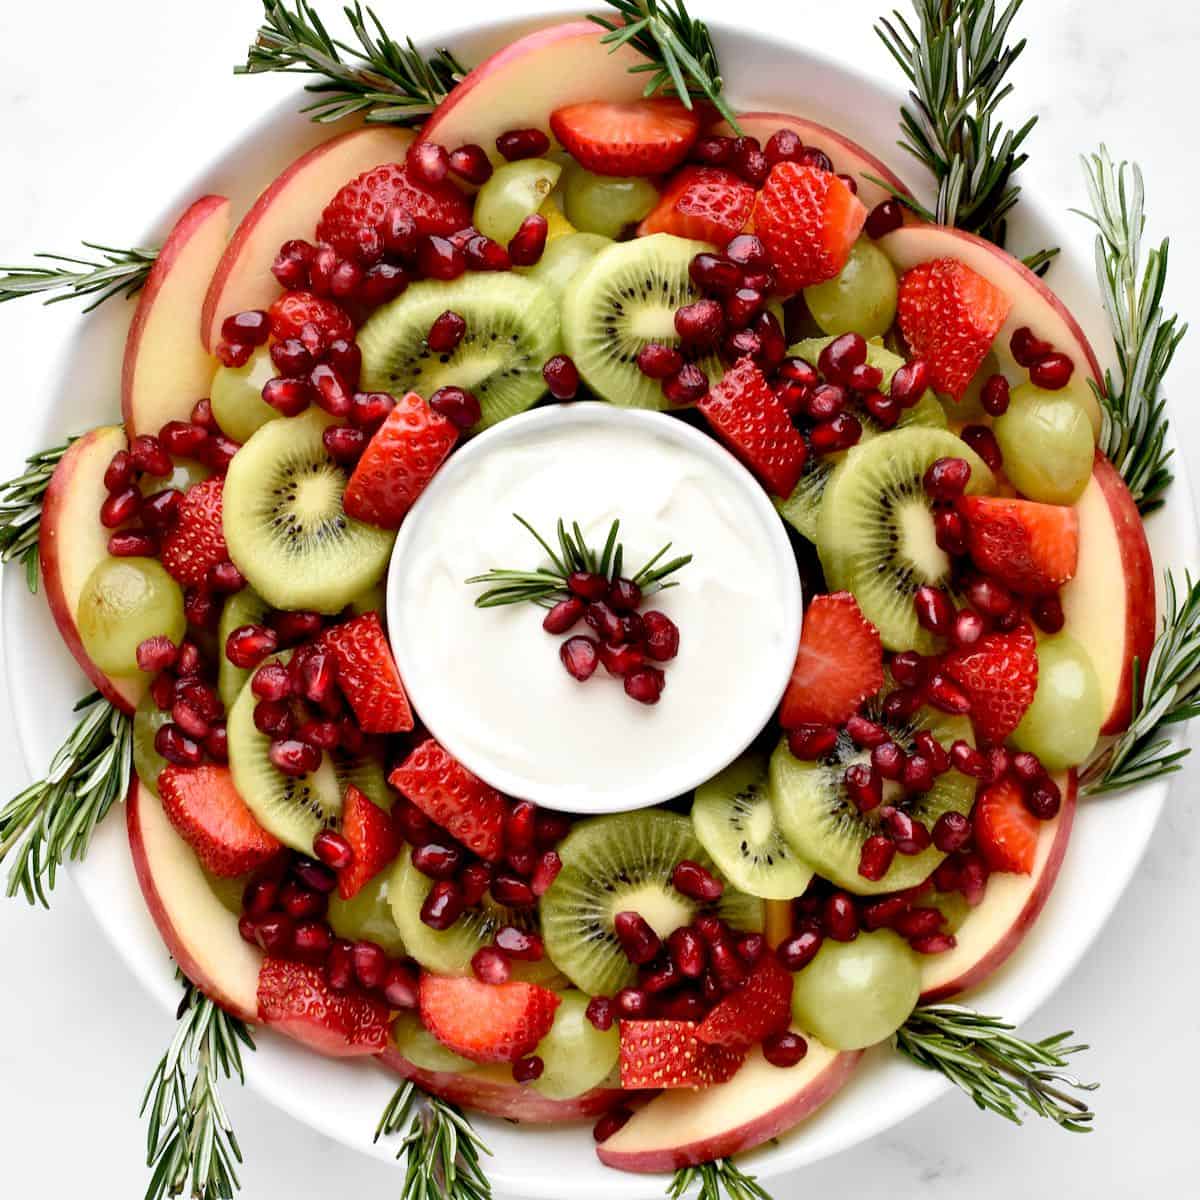 A fruit salad arranged in a wreath shape on a white plate, with a bowl of yogurt sauce in the middle.